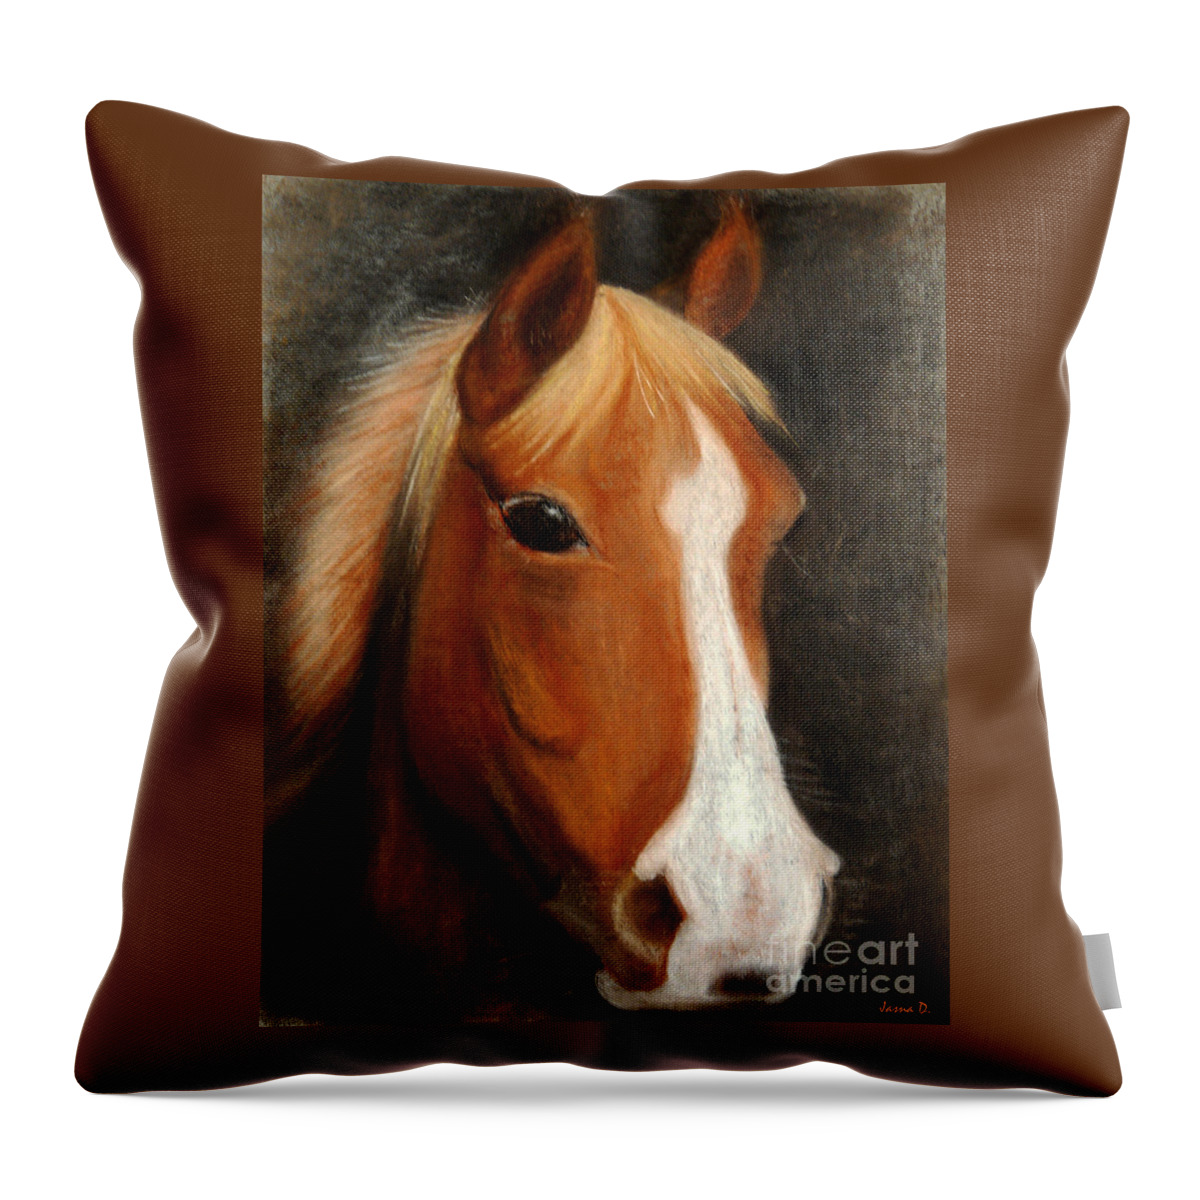 Portrait Of A Horse Throw Pillow featuring the painting Portrait Of A Horse by Jasna Dragun